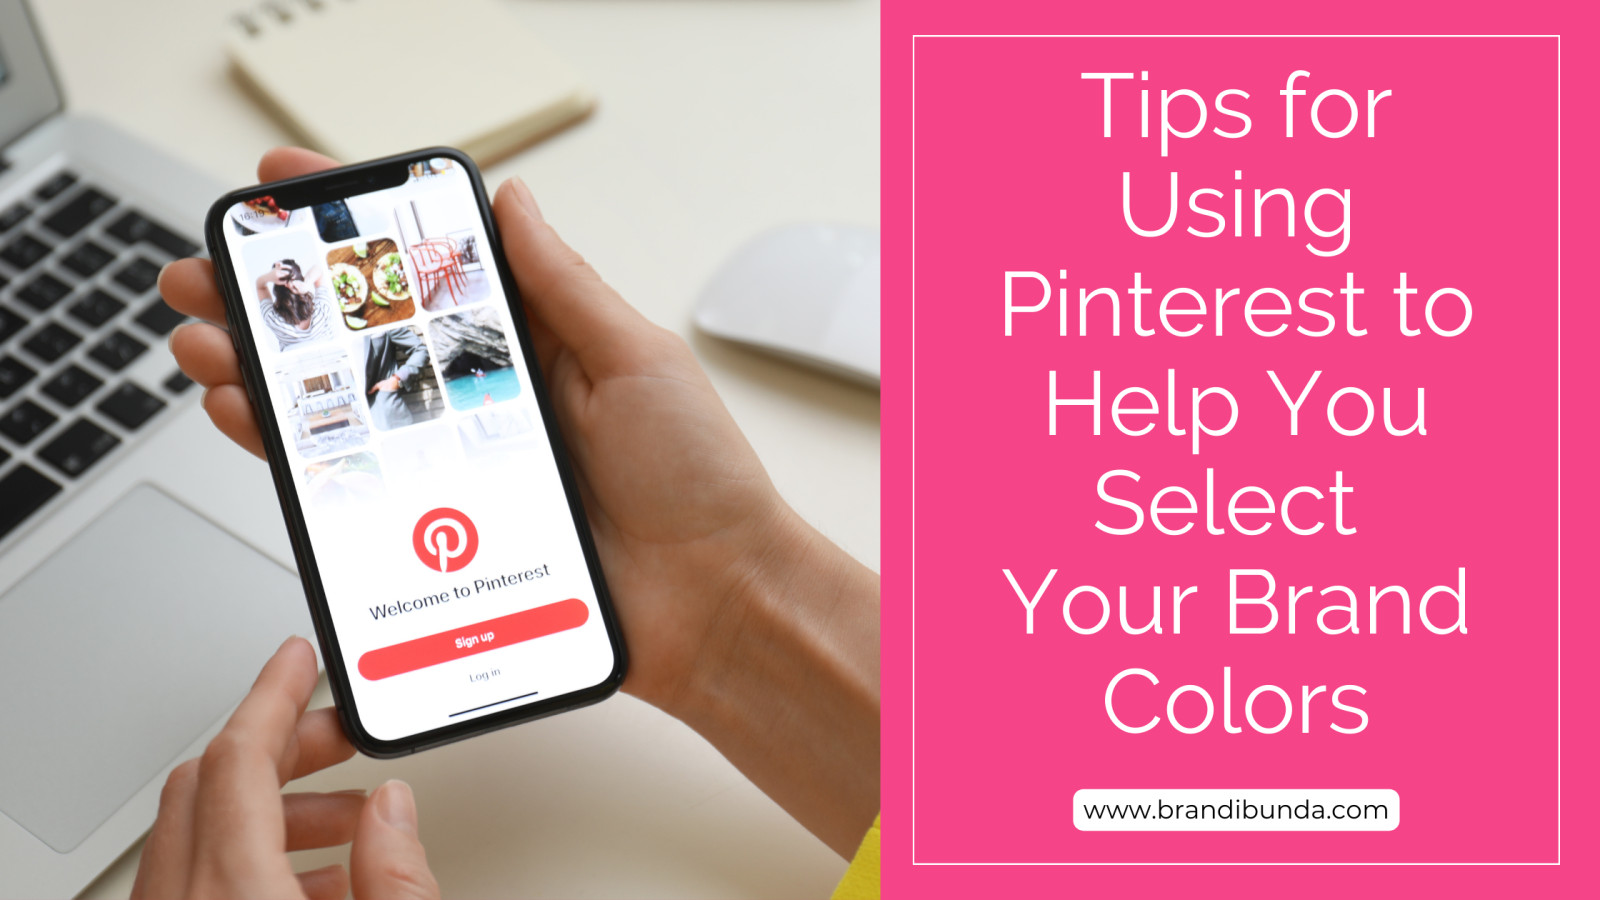 Tips for Using Pinterest to Help You Select Your Brand Colors